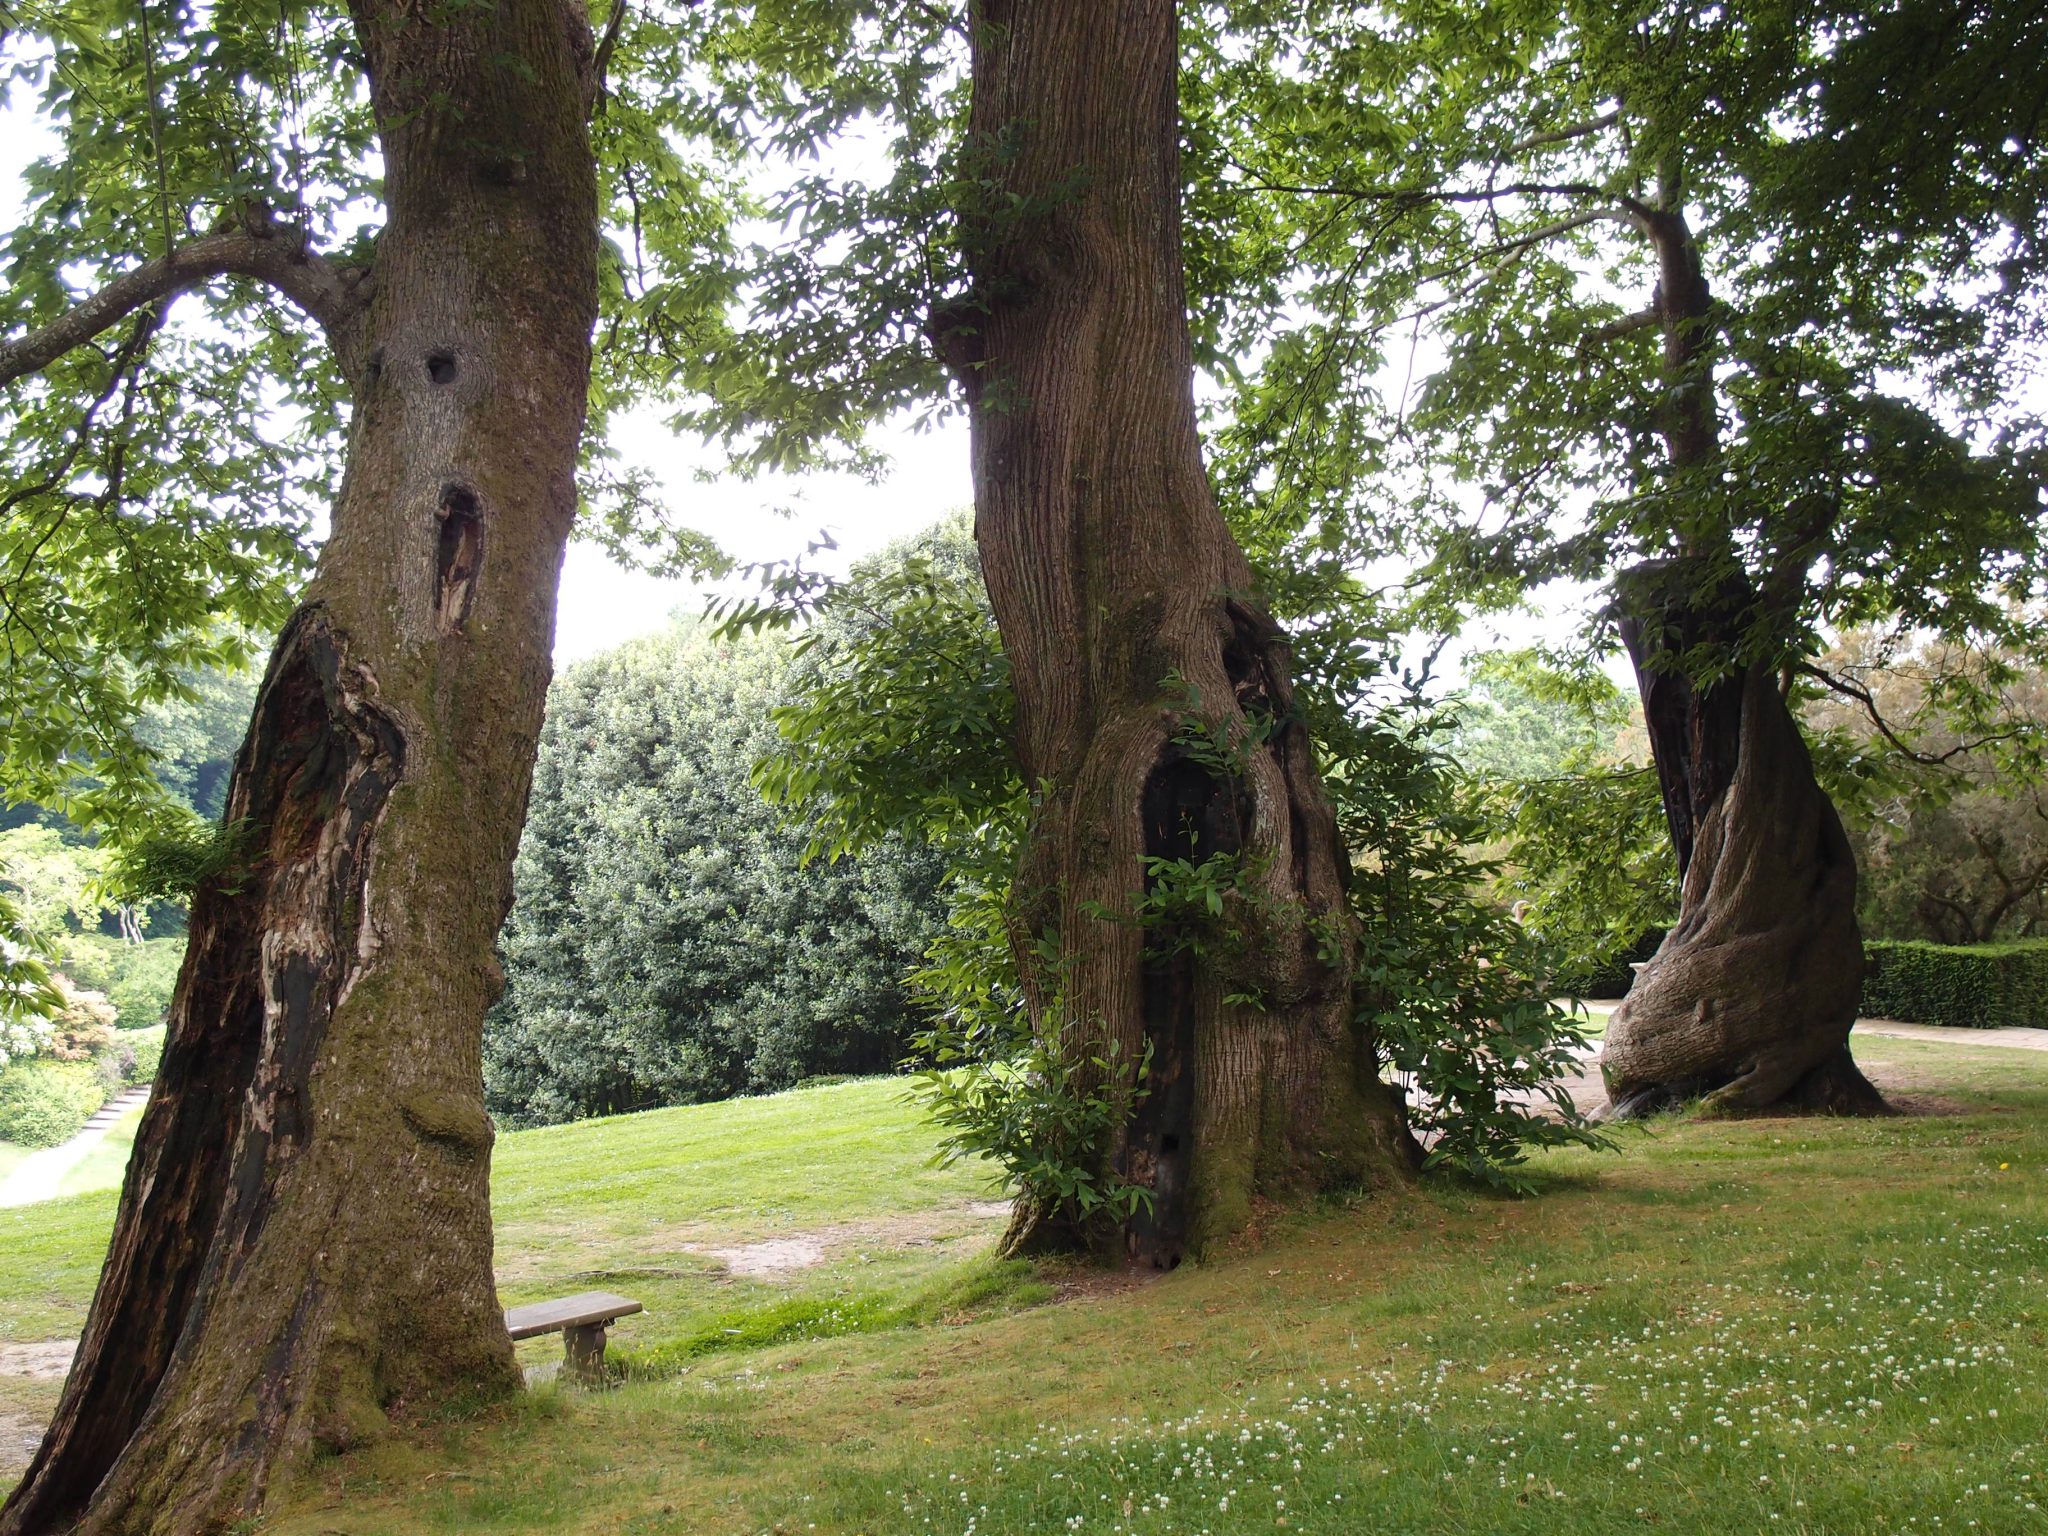 A spectacular cluster of 500-year-old Spanish Chestnut Trees towers over the western edge of the Tiltyard. The Chestnuts are Dartington's most precious specimens, and were planted by the first of the Champernownes, when that family acquired the property.